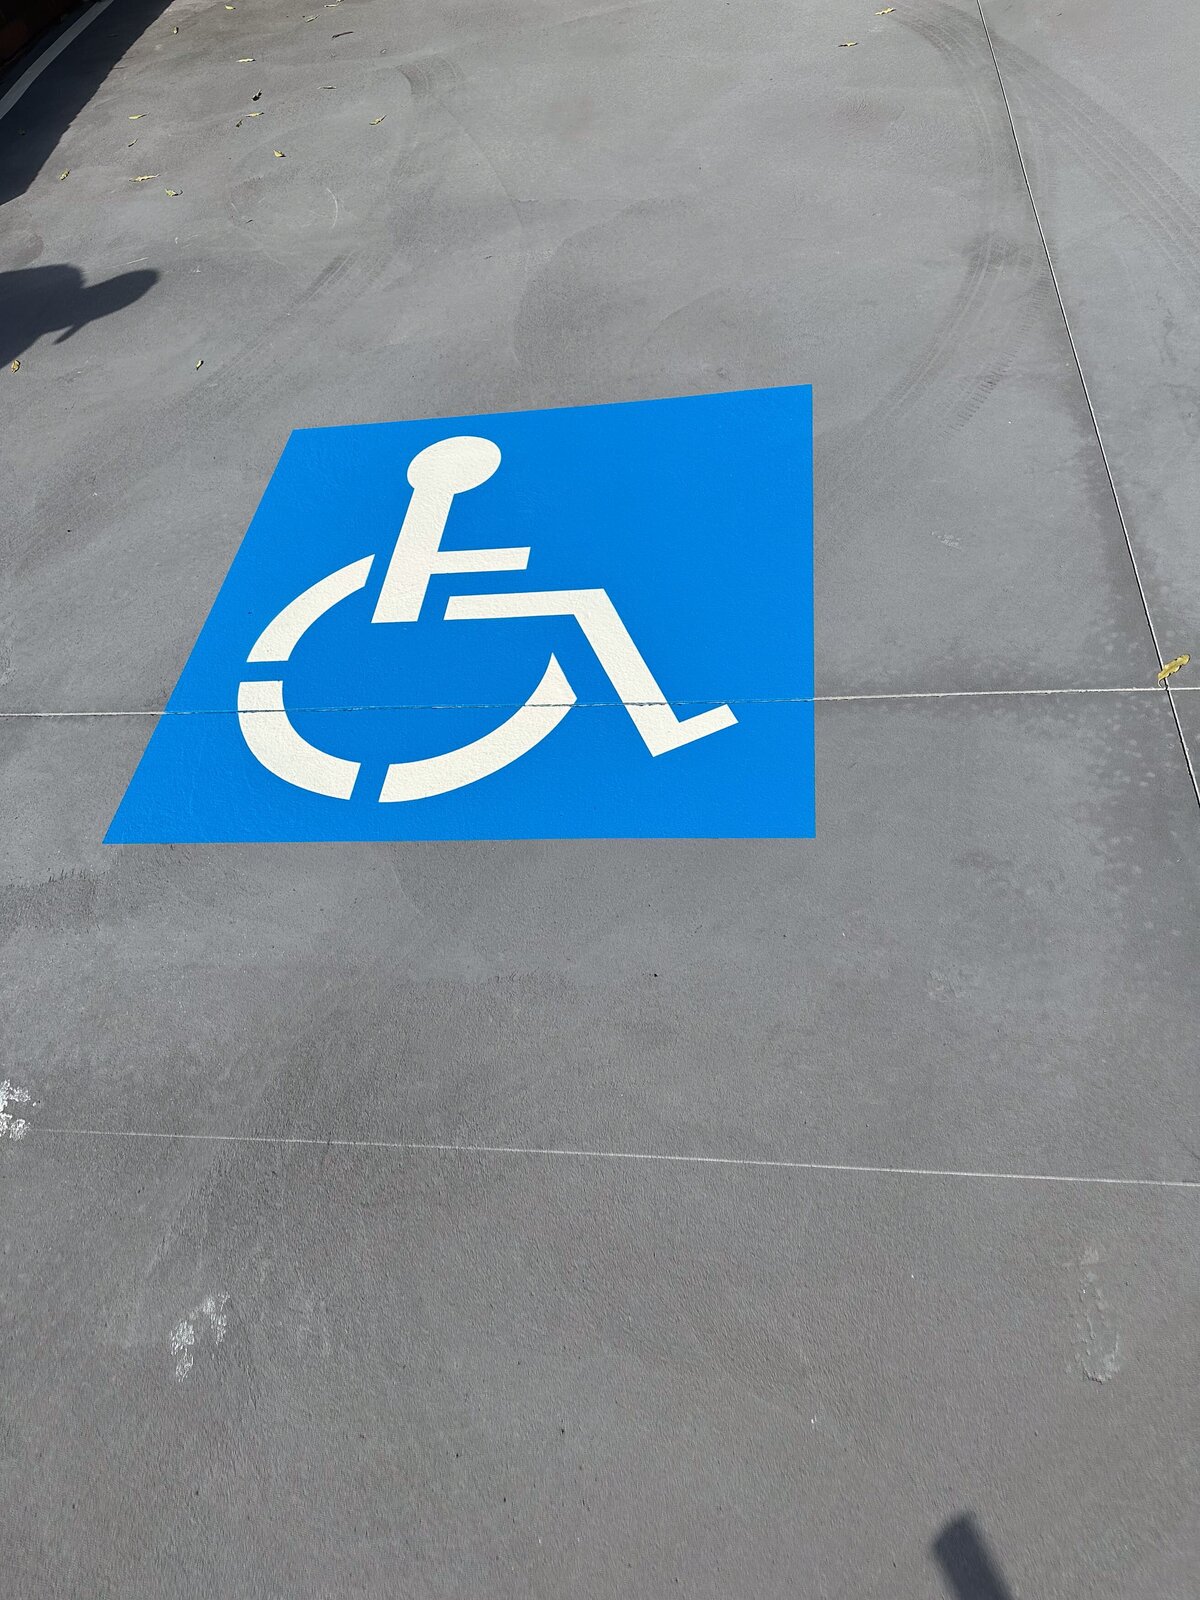 Disabled parking are line marking for a parking bays